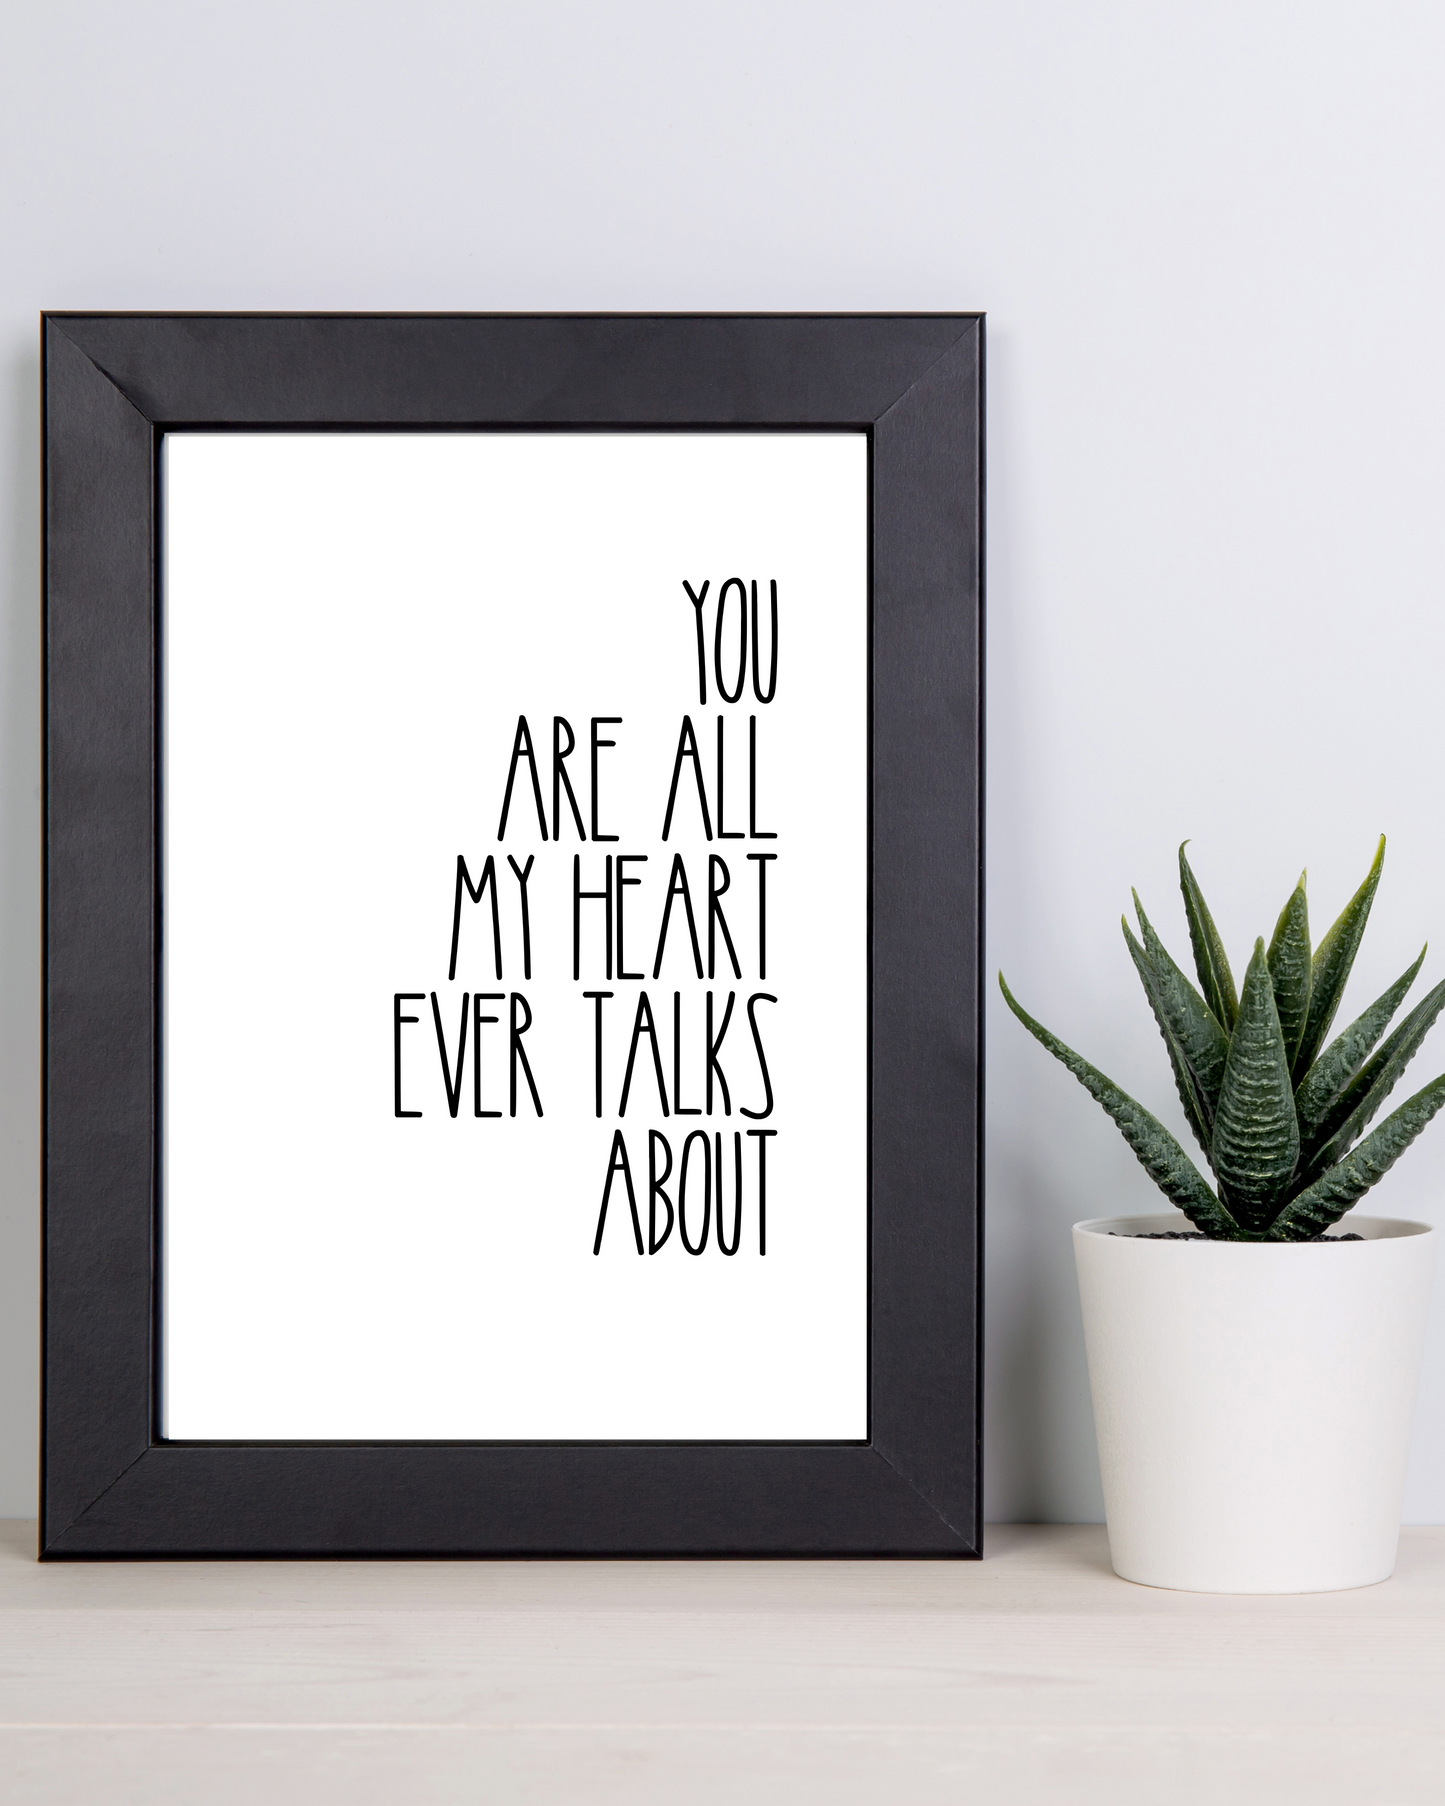 "You Are All My Heart Ever Talks About" Rae Dunn Inspired, Love Quotes, Printable Art